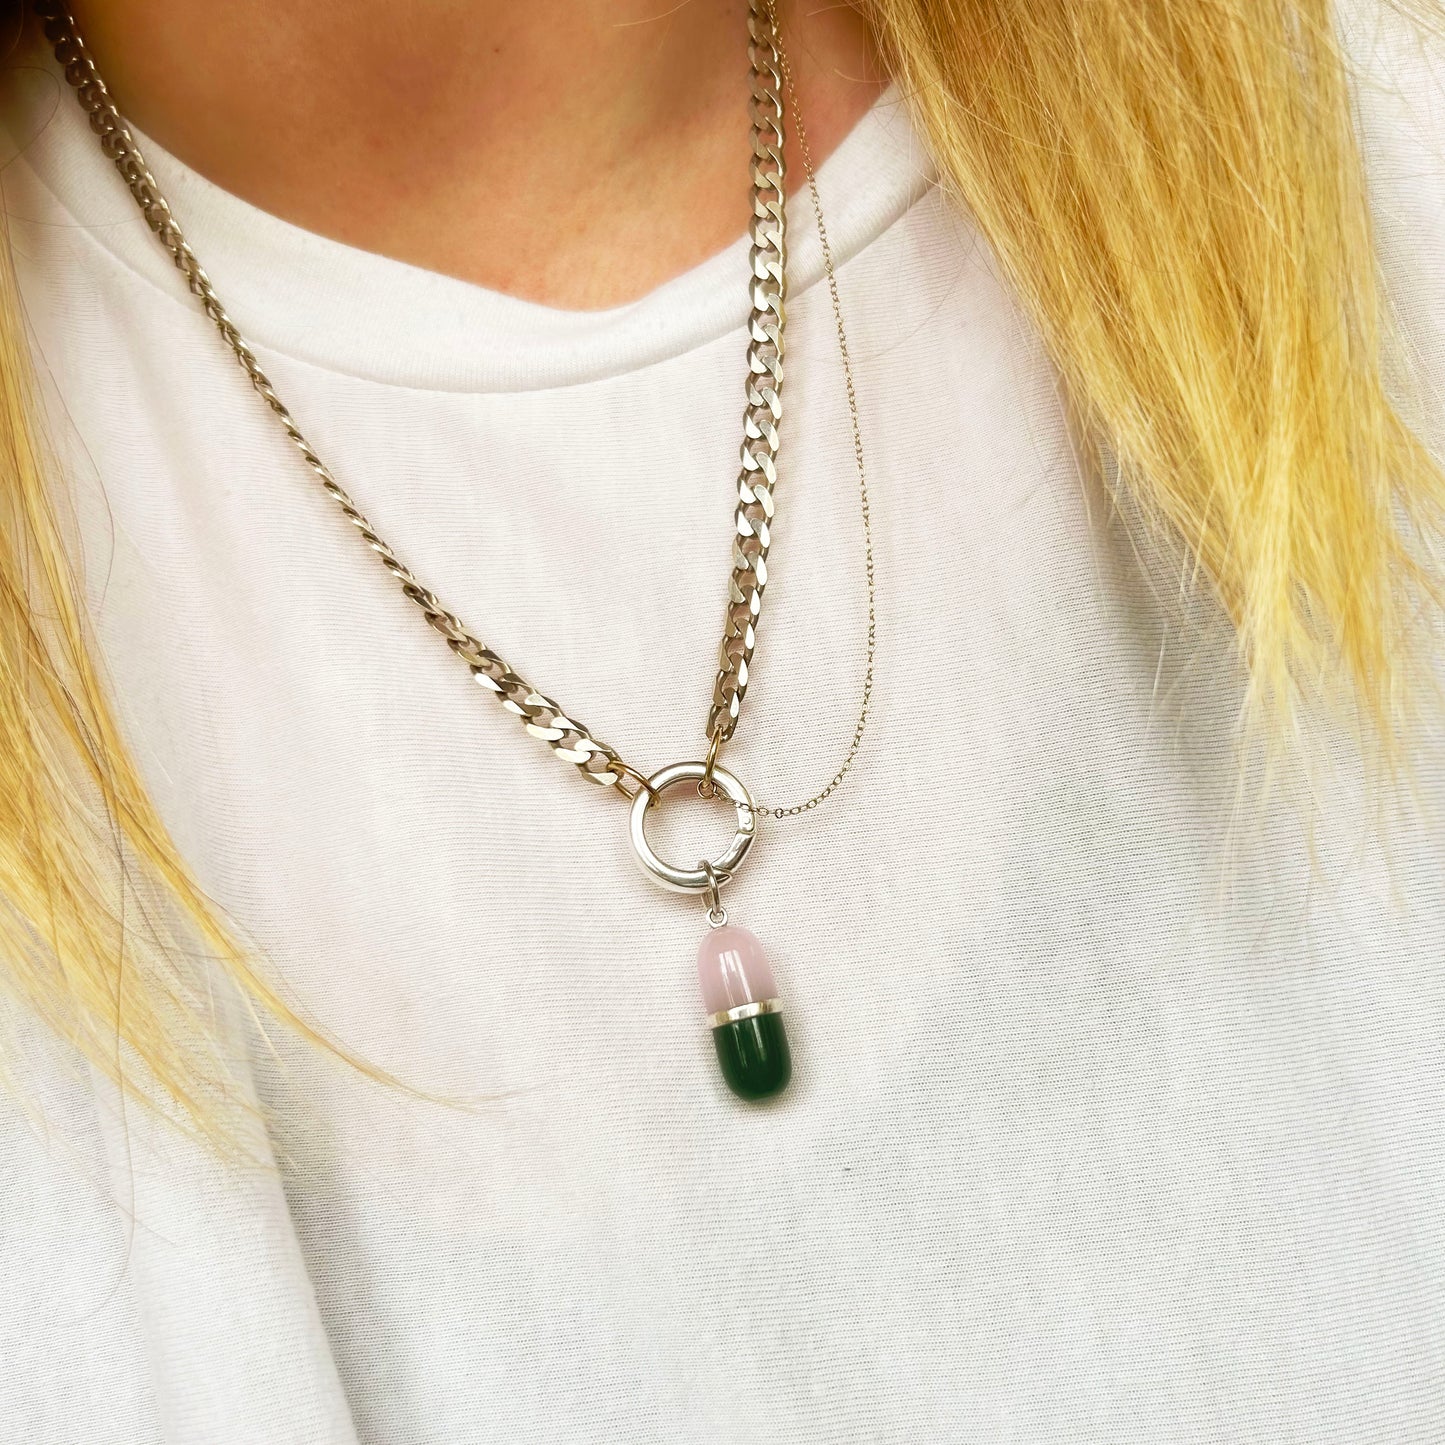 Gemstone Pill Pendants | Chain Excluded